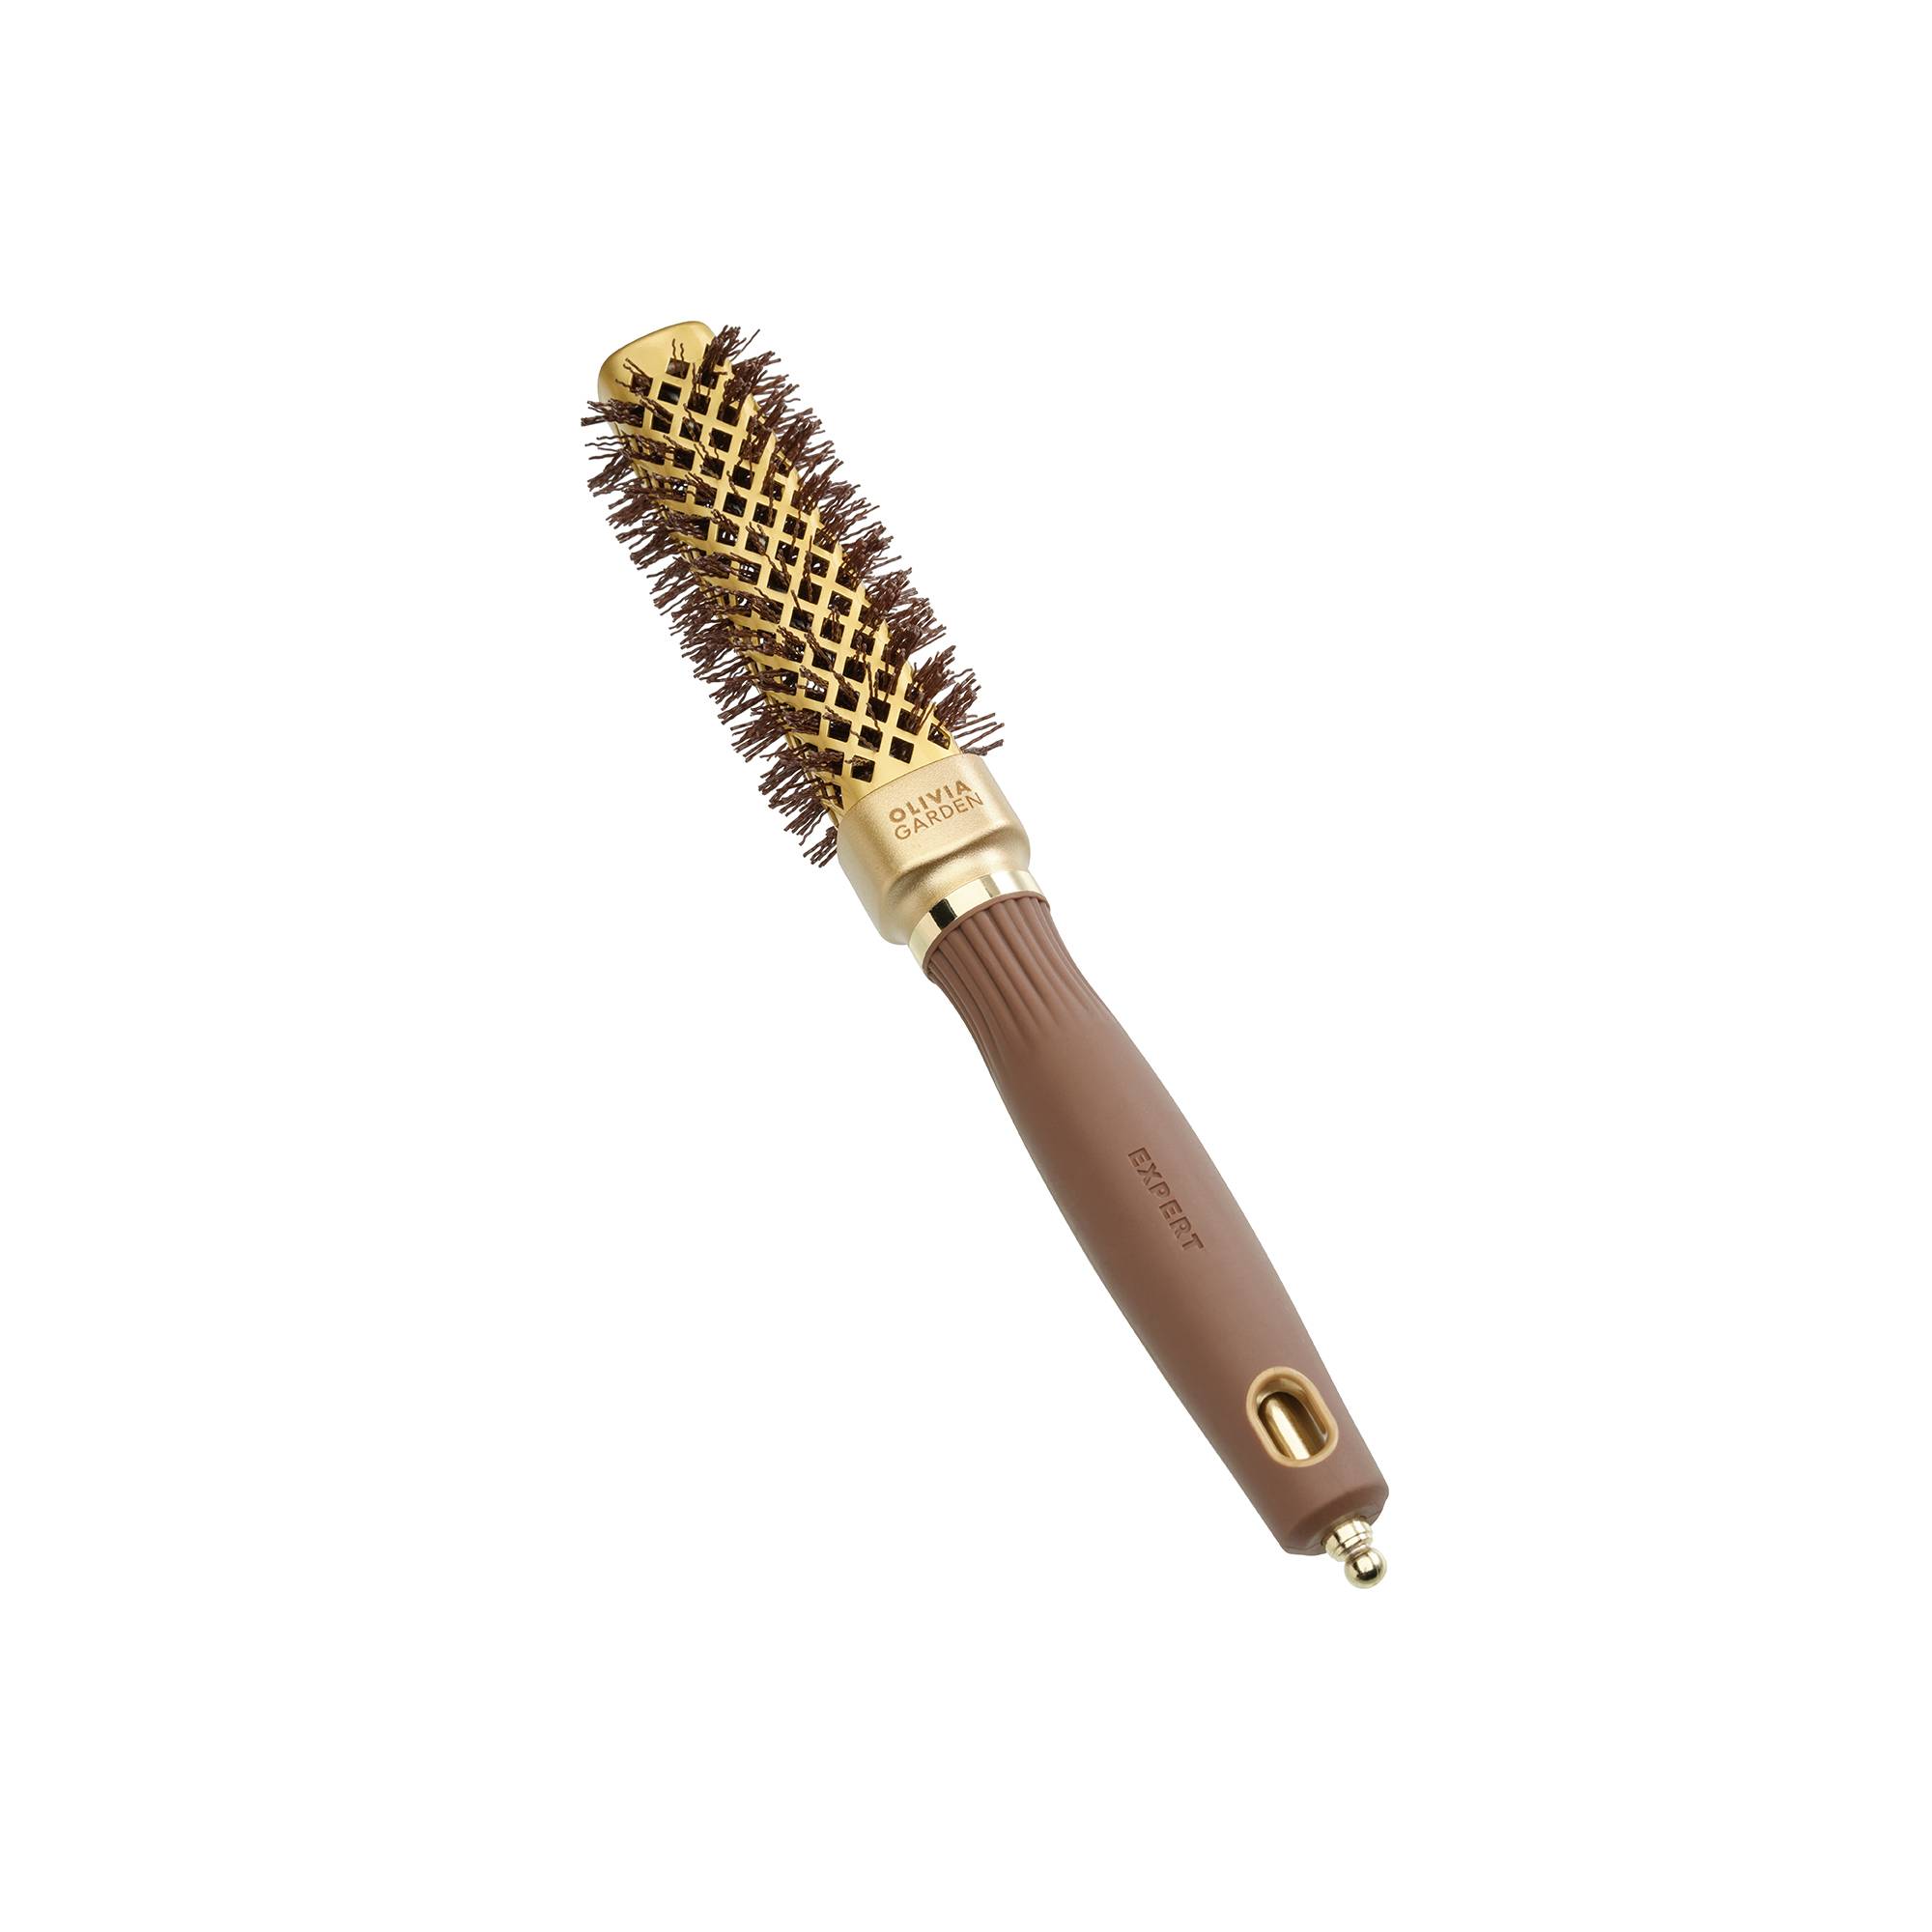 Spazzola per il brushing Expert Blowout Straight Wavy Bristle Gold&Brown 20mm del marchio Olivia Garden - 2